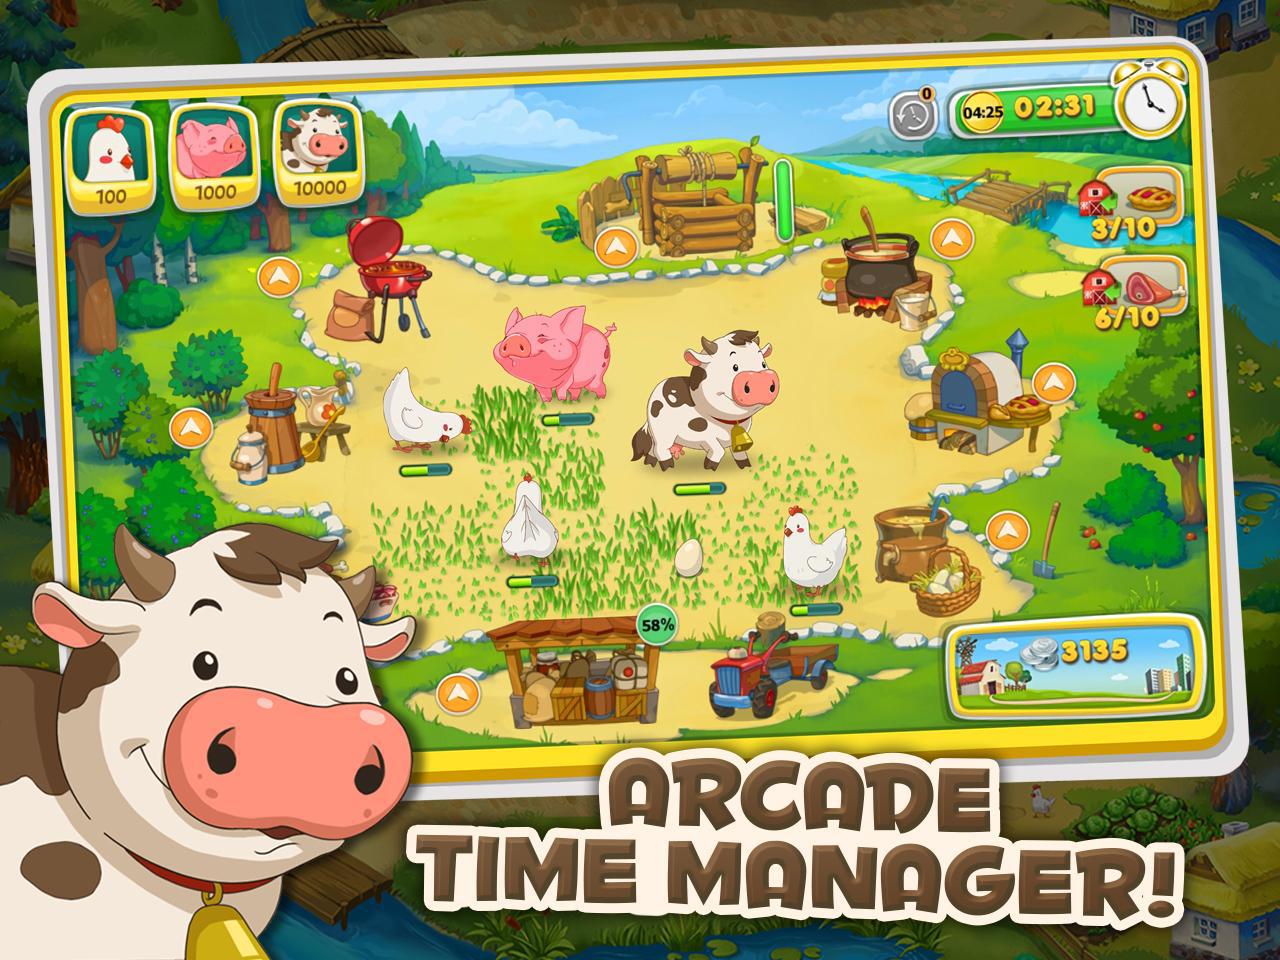 Jolly Days Farm: Time Management Game